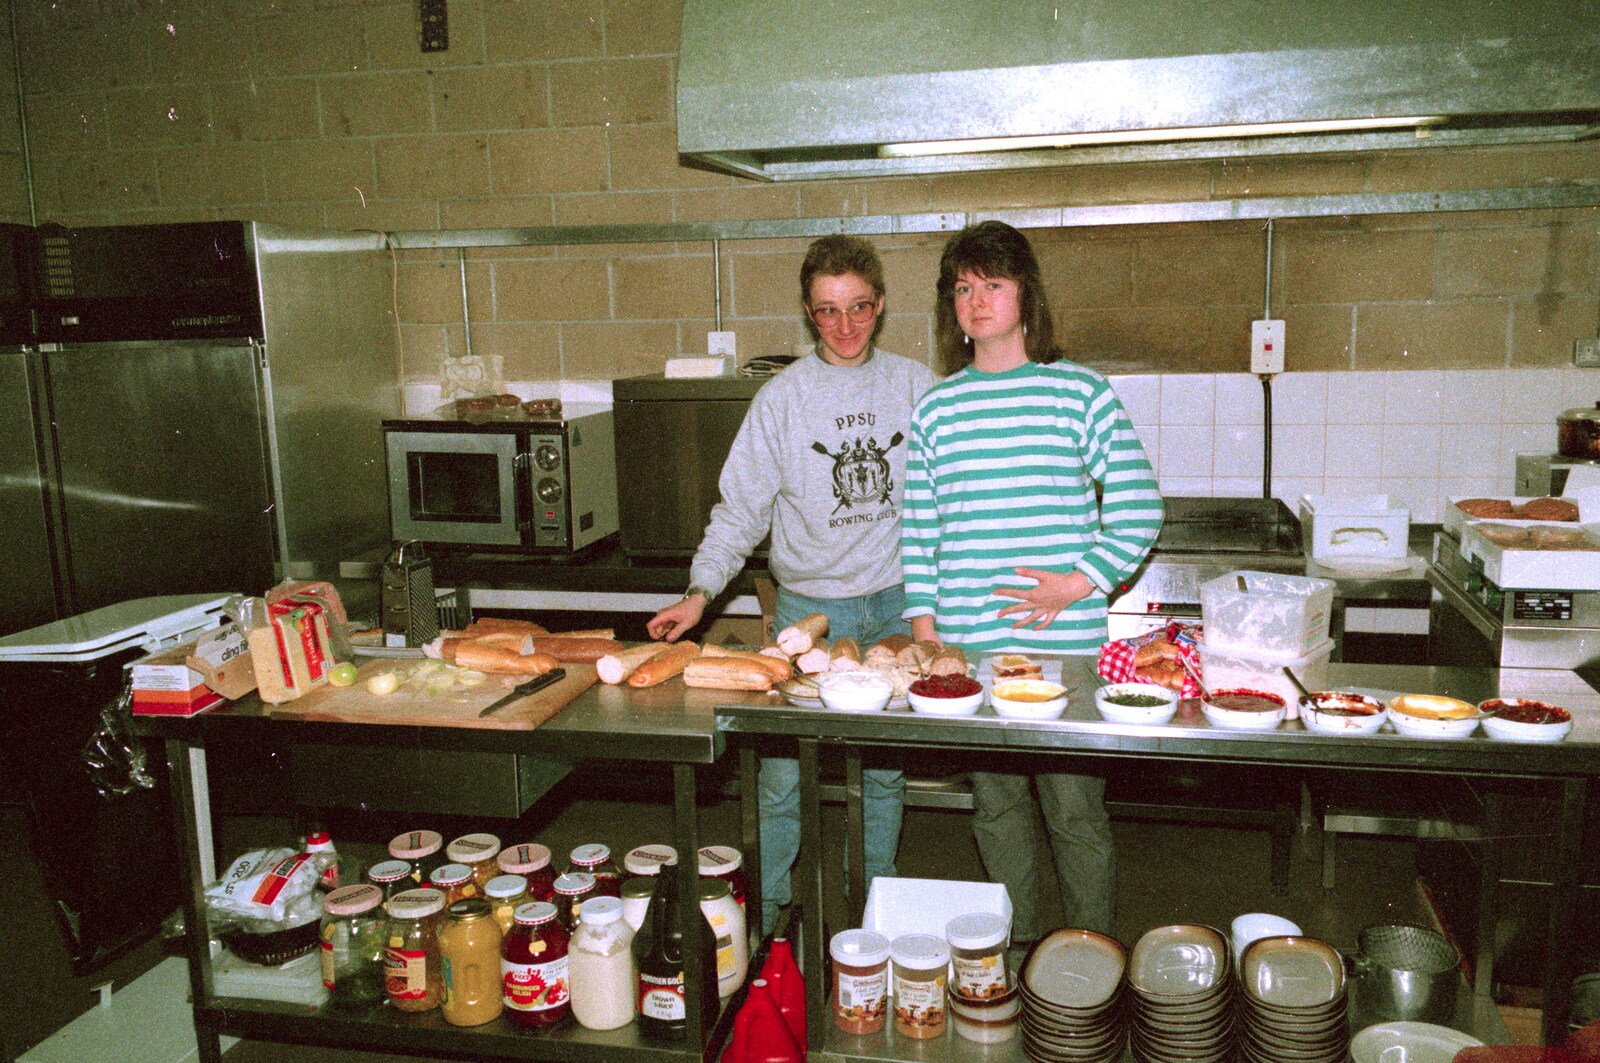 The PPSU burger and snack kitchen from Uni: Scenes of Plymouth and the PPSU Bar, Plymouth Polytechnic, Devon - 28th April 1986